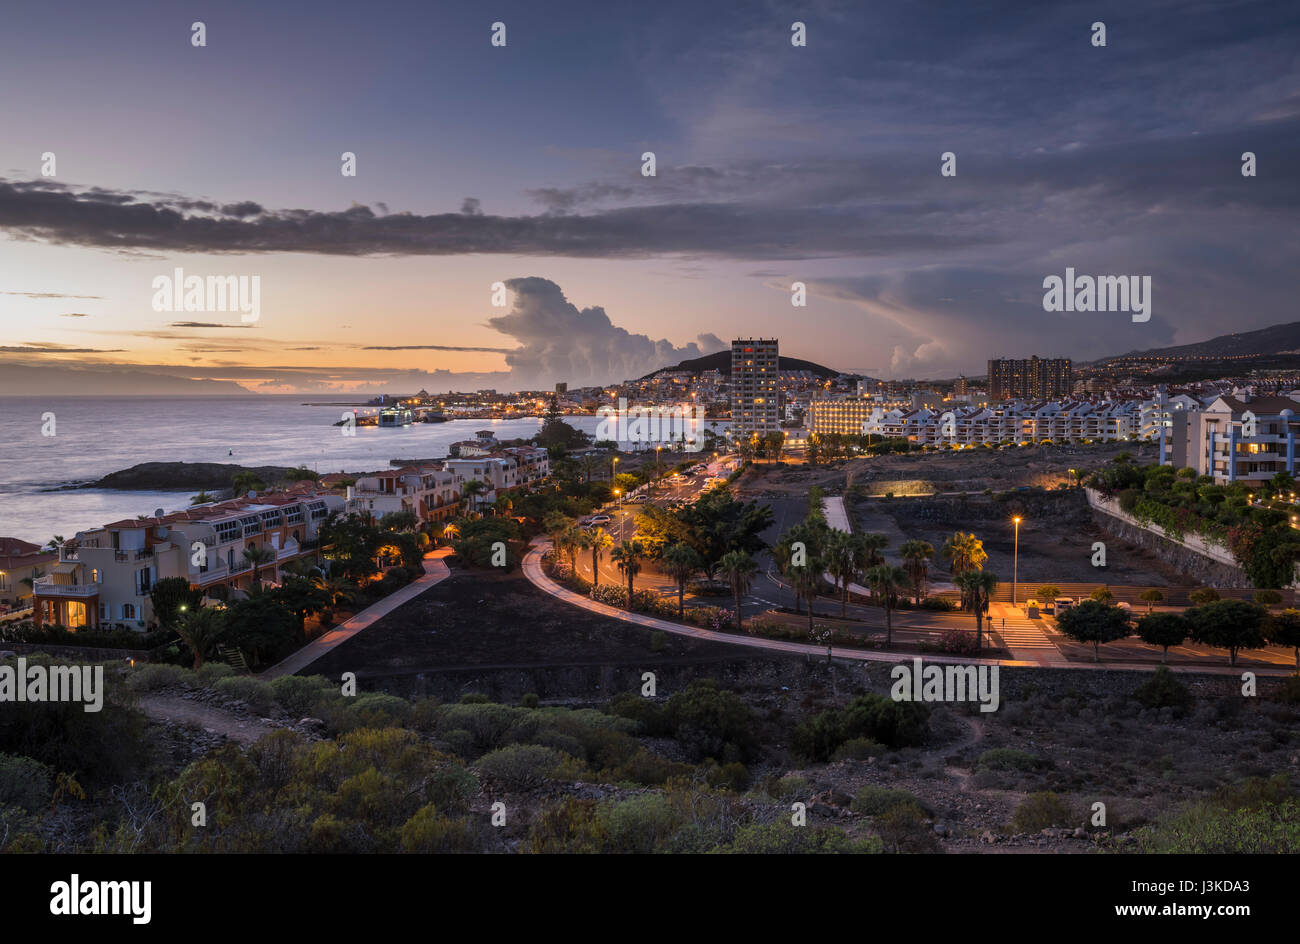 The holiday resort of Los Cristianos, Tenerife, after sunset Stock Photo